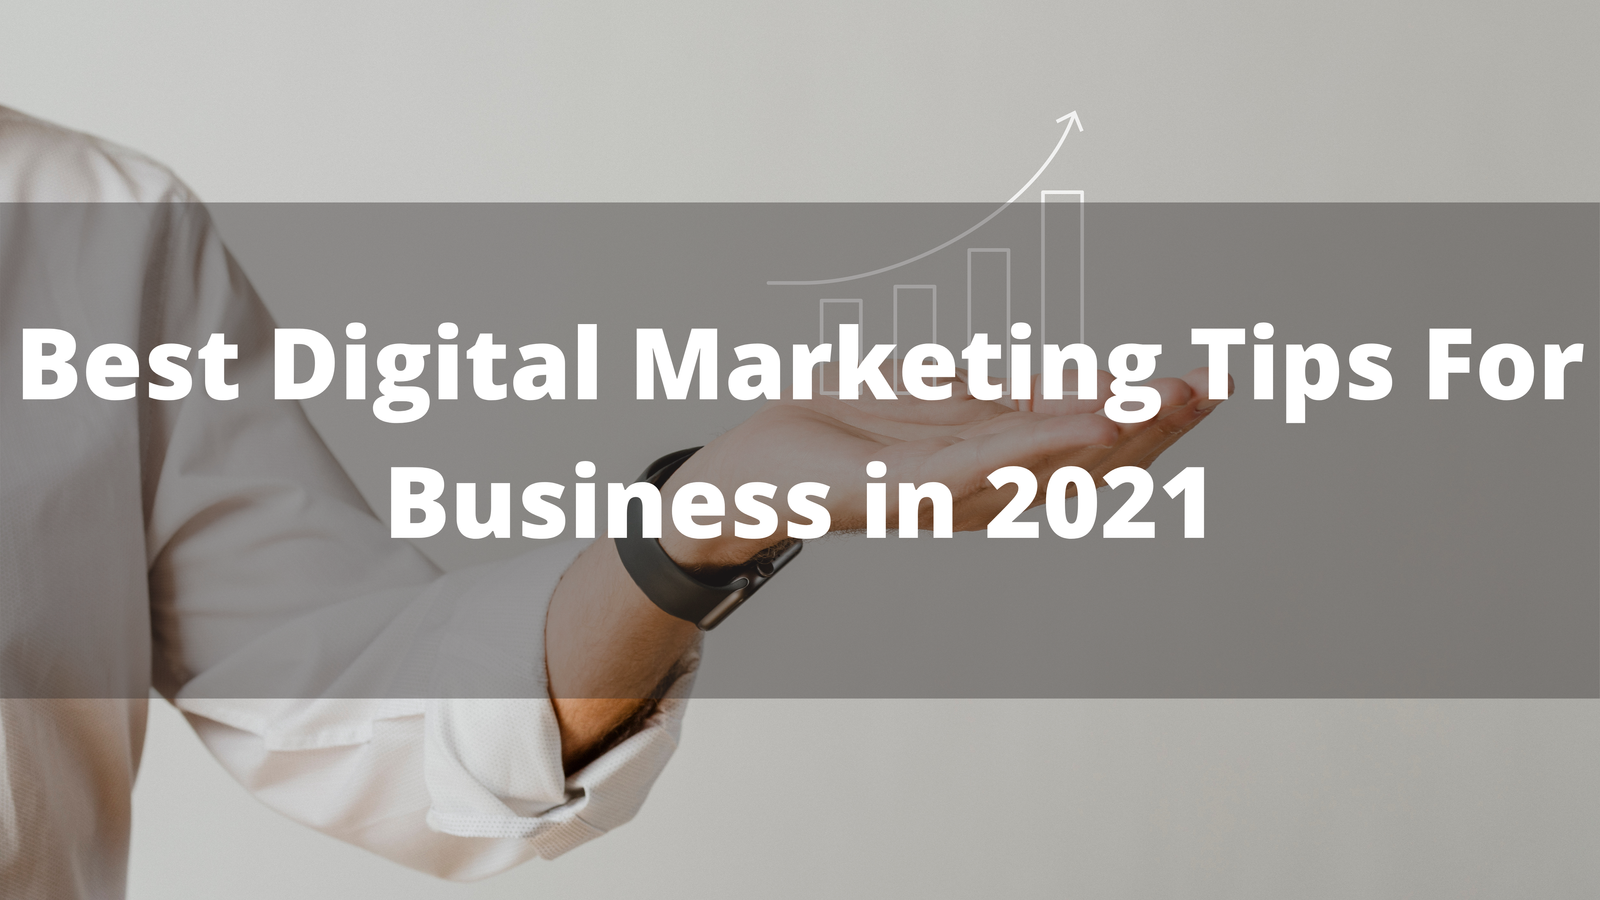 Best Digital Marketing Tips For Business in 2021